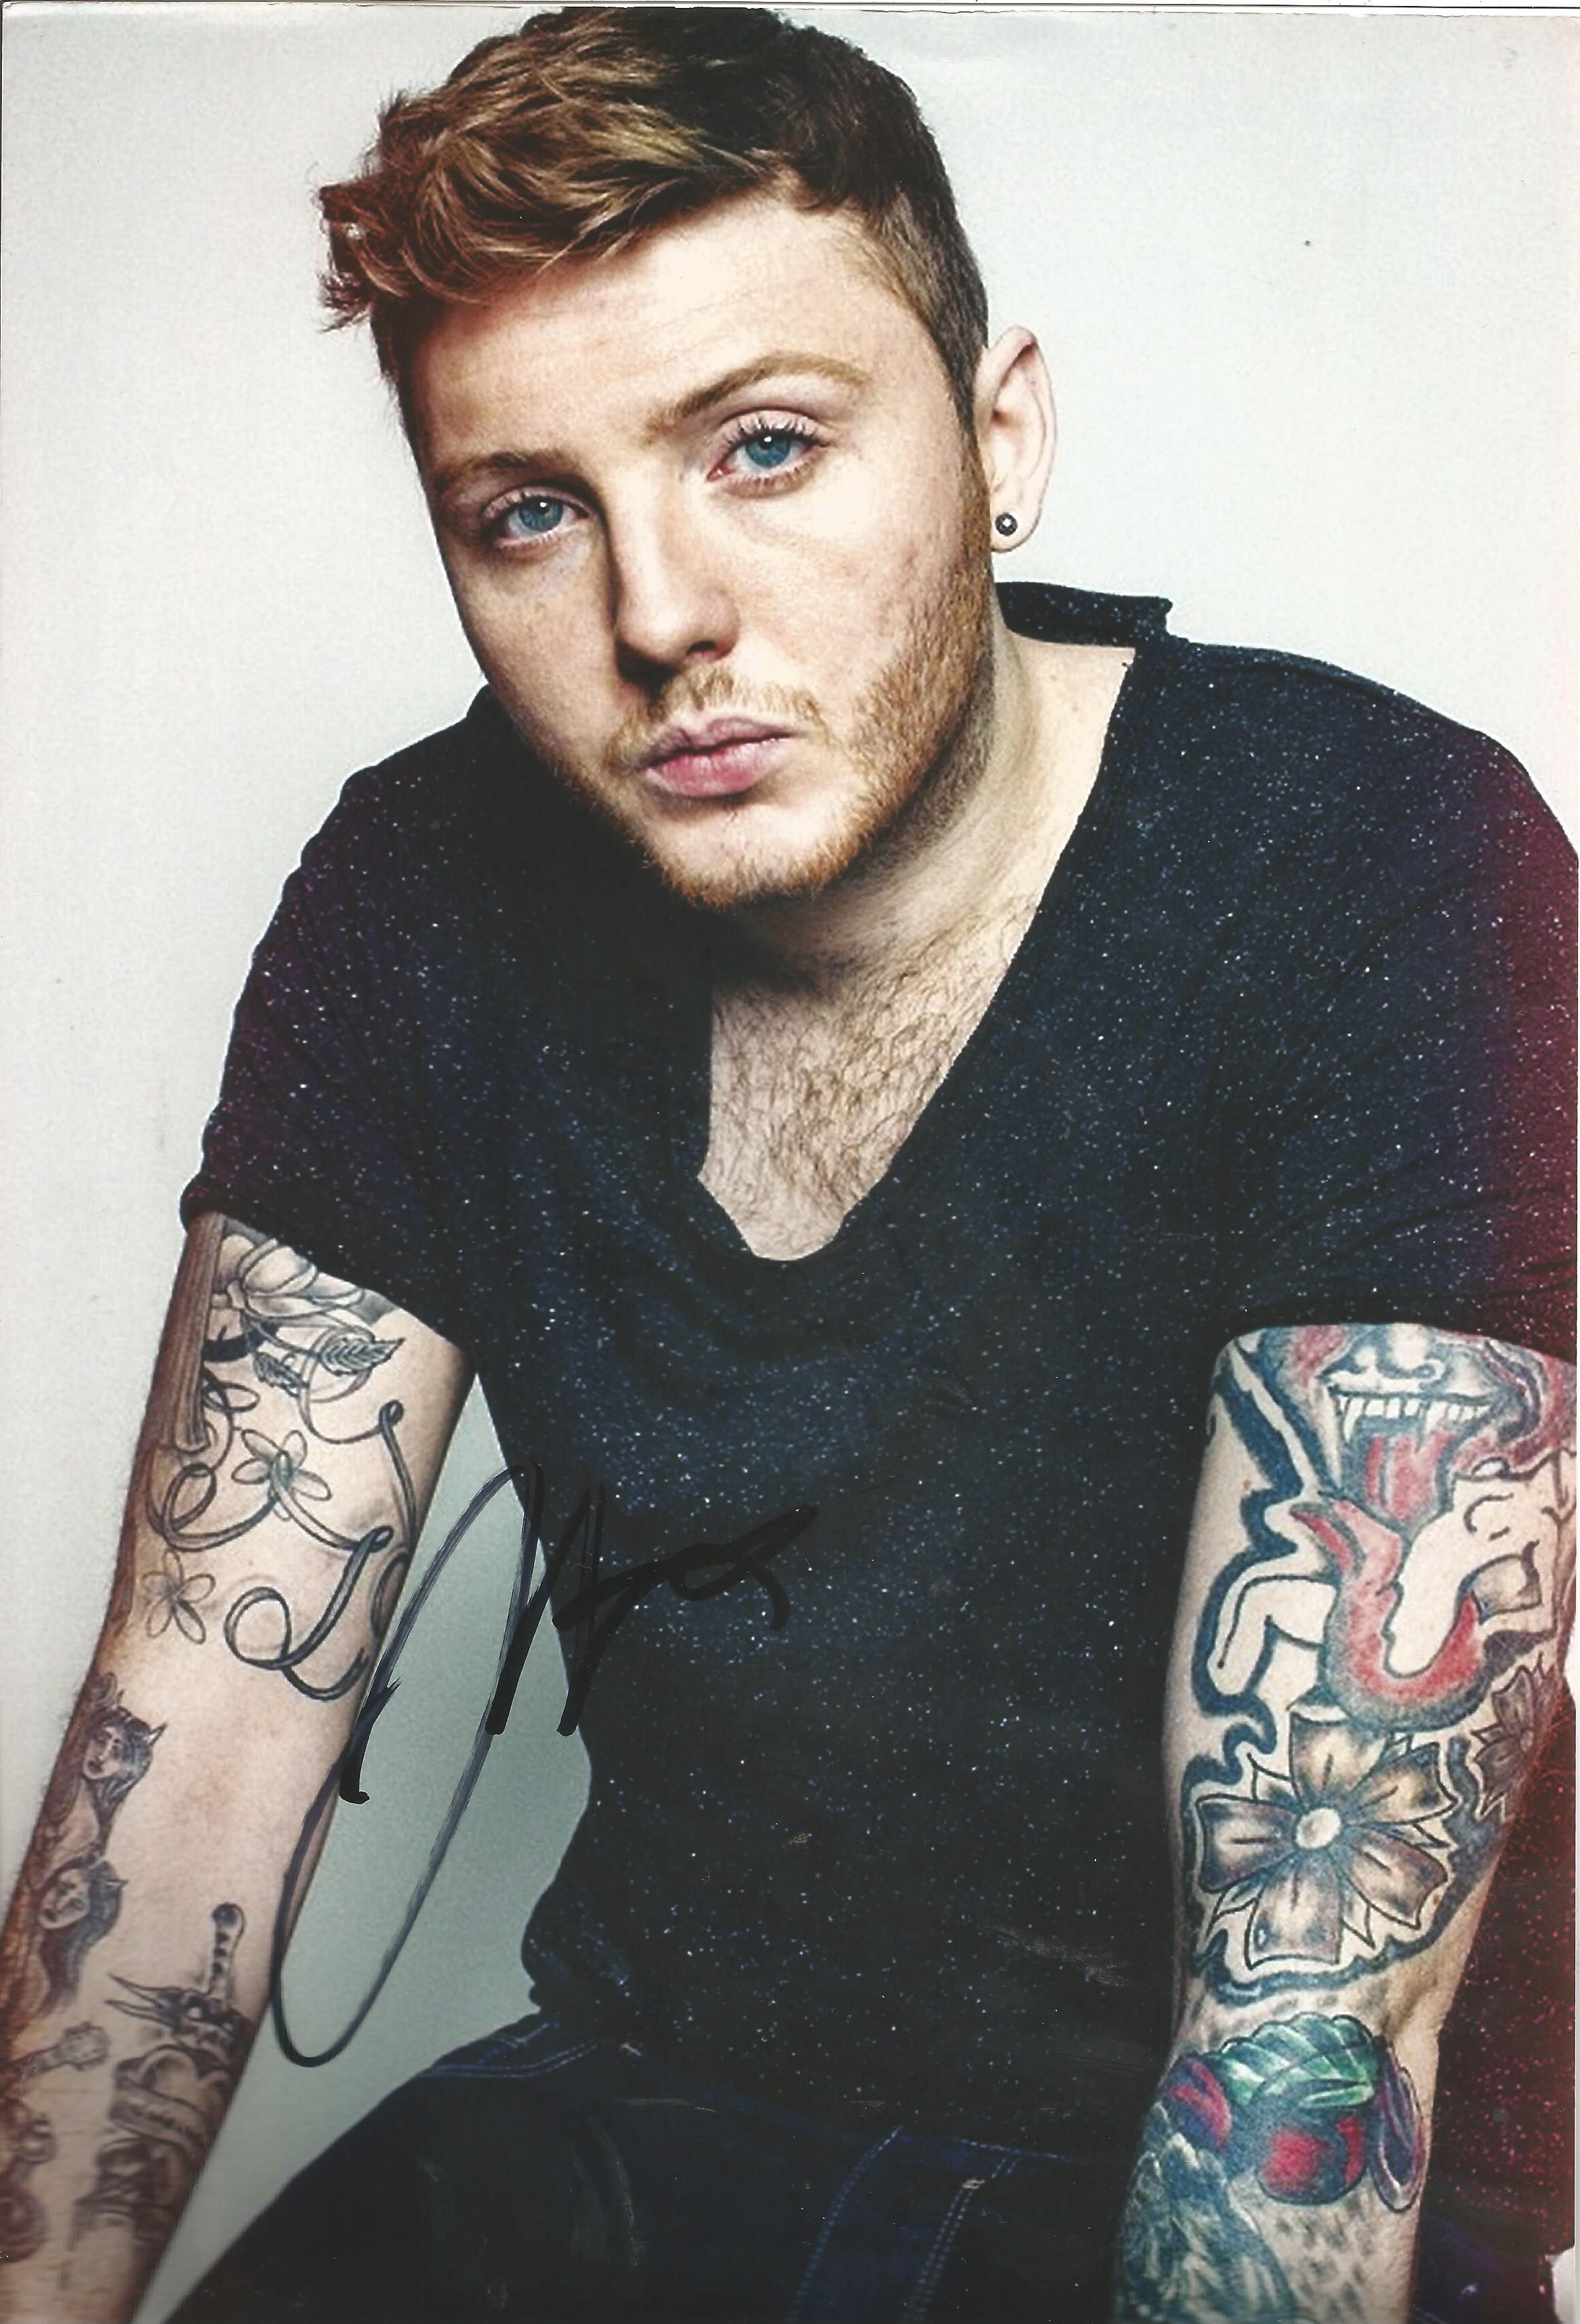 Music James Arthur 10x8 signed colour photo. James Andrew Arthur is an English singer and